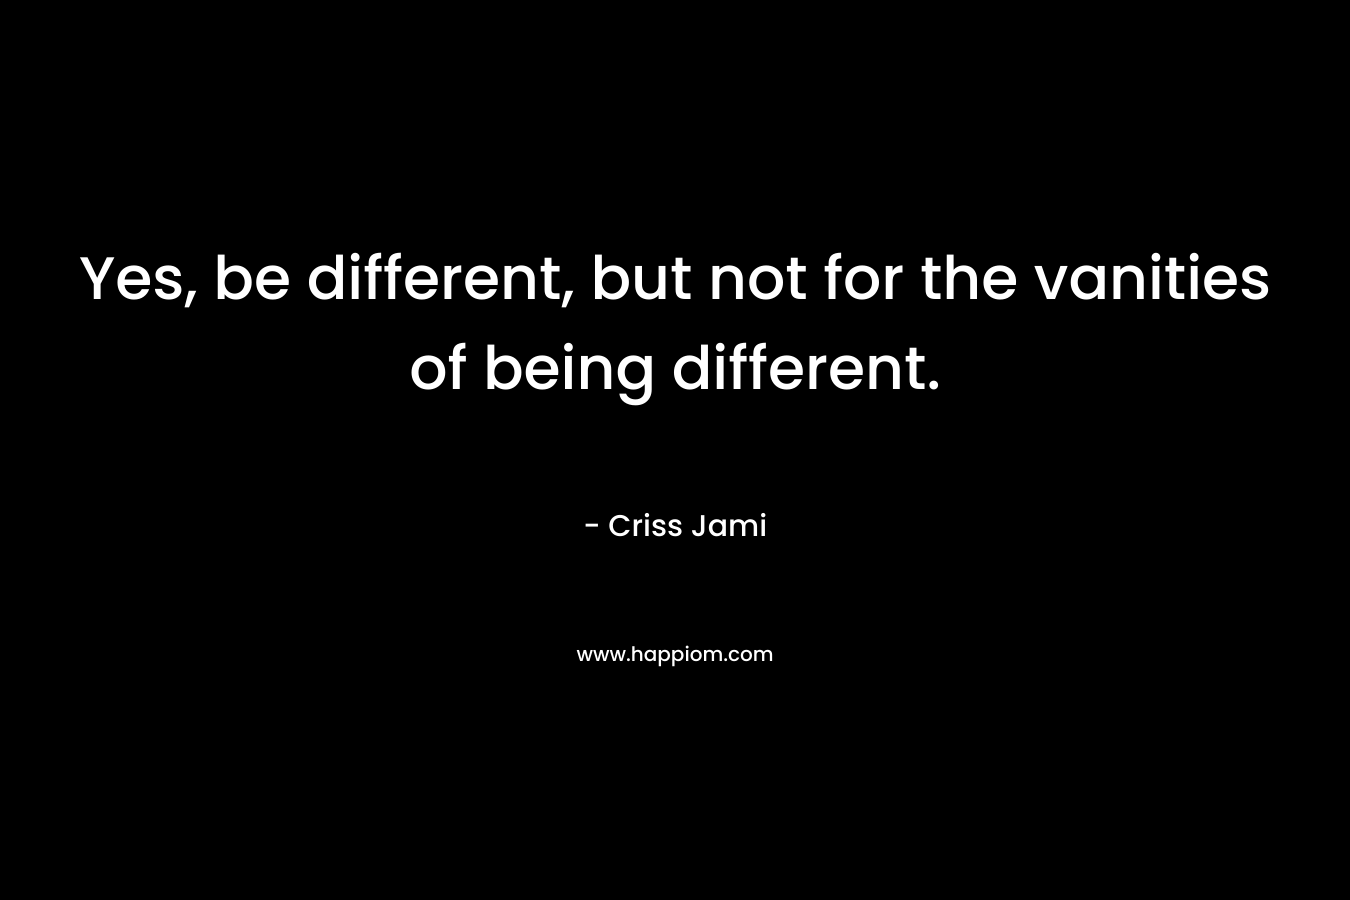 Yes, be different, but not for the vanities of being different.